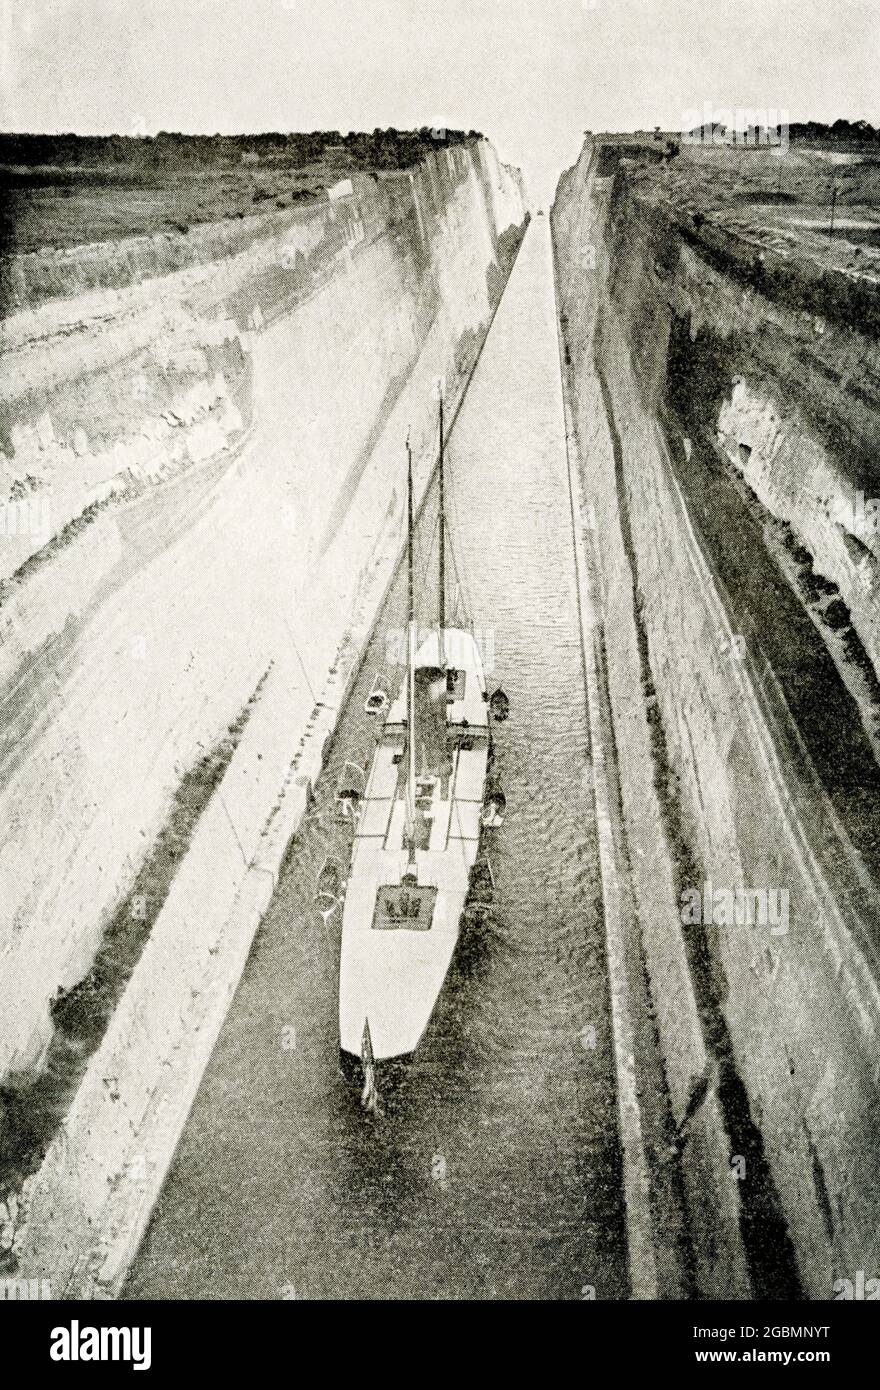 The 1912 caption reads: “Canal that Nero Dreamed of - This is one of the wonderful canals which helped to shorten the journey around the world. It is the Corinth Canal, cut through the Isthmus of Corinth, and it enables ships to go to Athens and then on through the blue Aegean Sea to Constantinople without having to sail round the rocky coast of Morea, in the south of Greece. When the Roman emperor Nero was young and energetic, he caused this canal to be be begun, but the work was put off and never resumed until our own time. It is 3.2 miles long, and was cut through limestone rock in one part Stock Photo